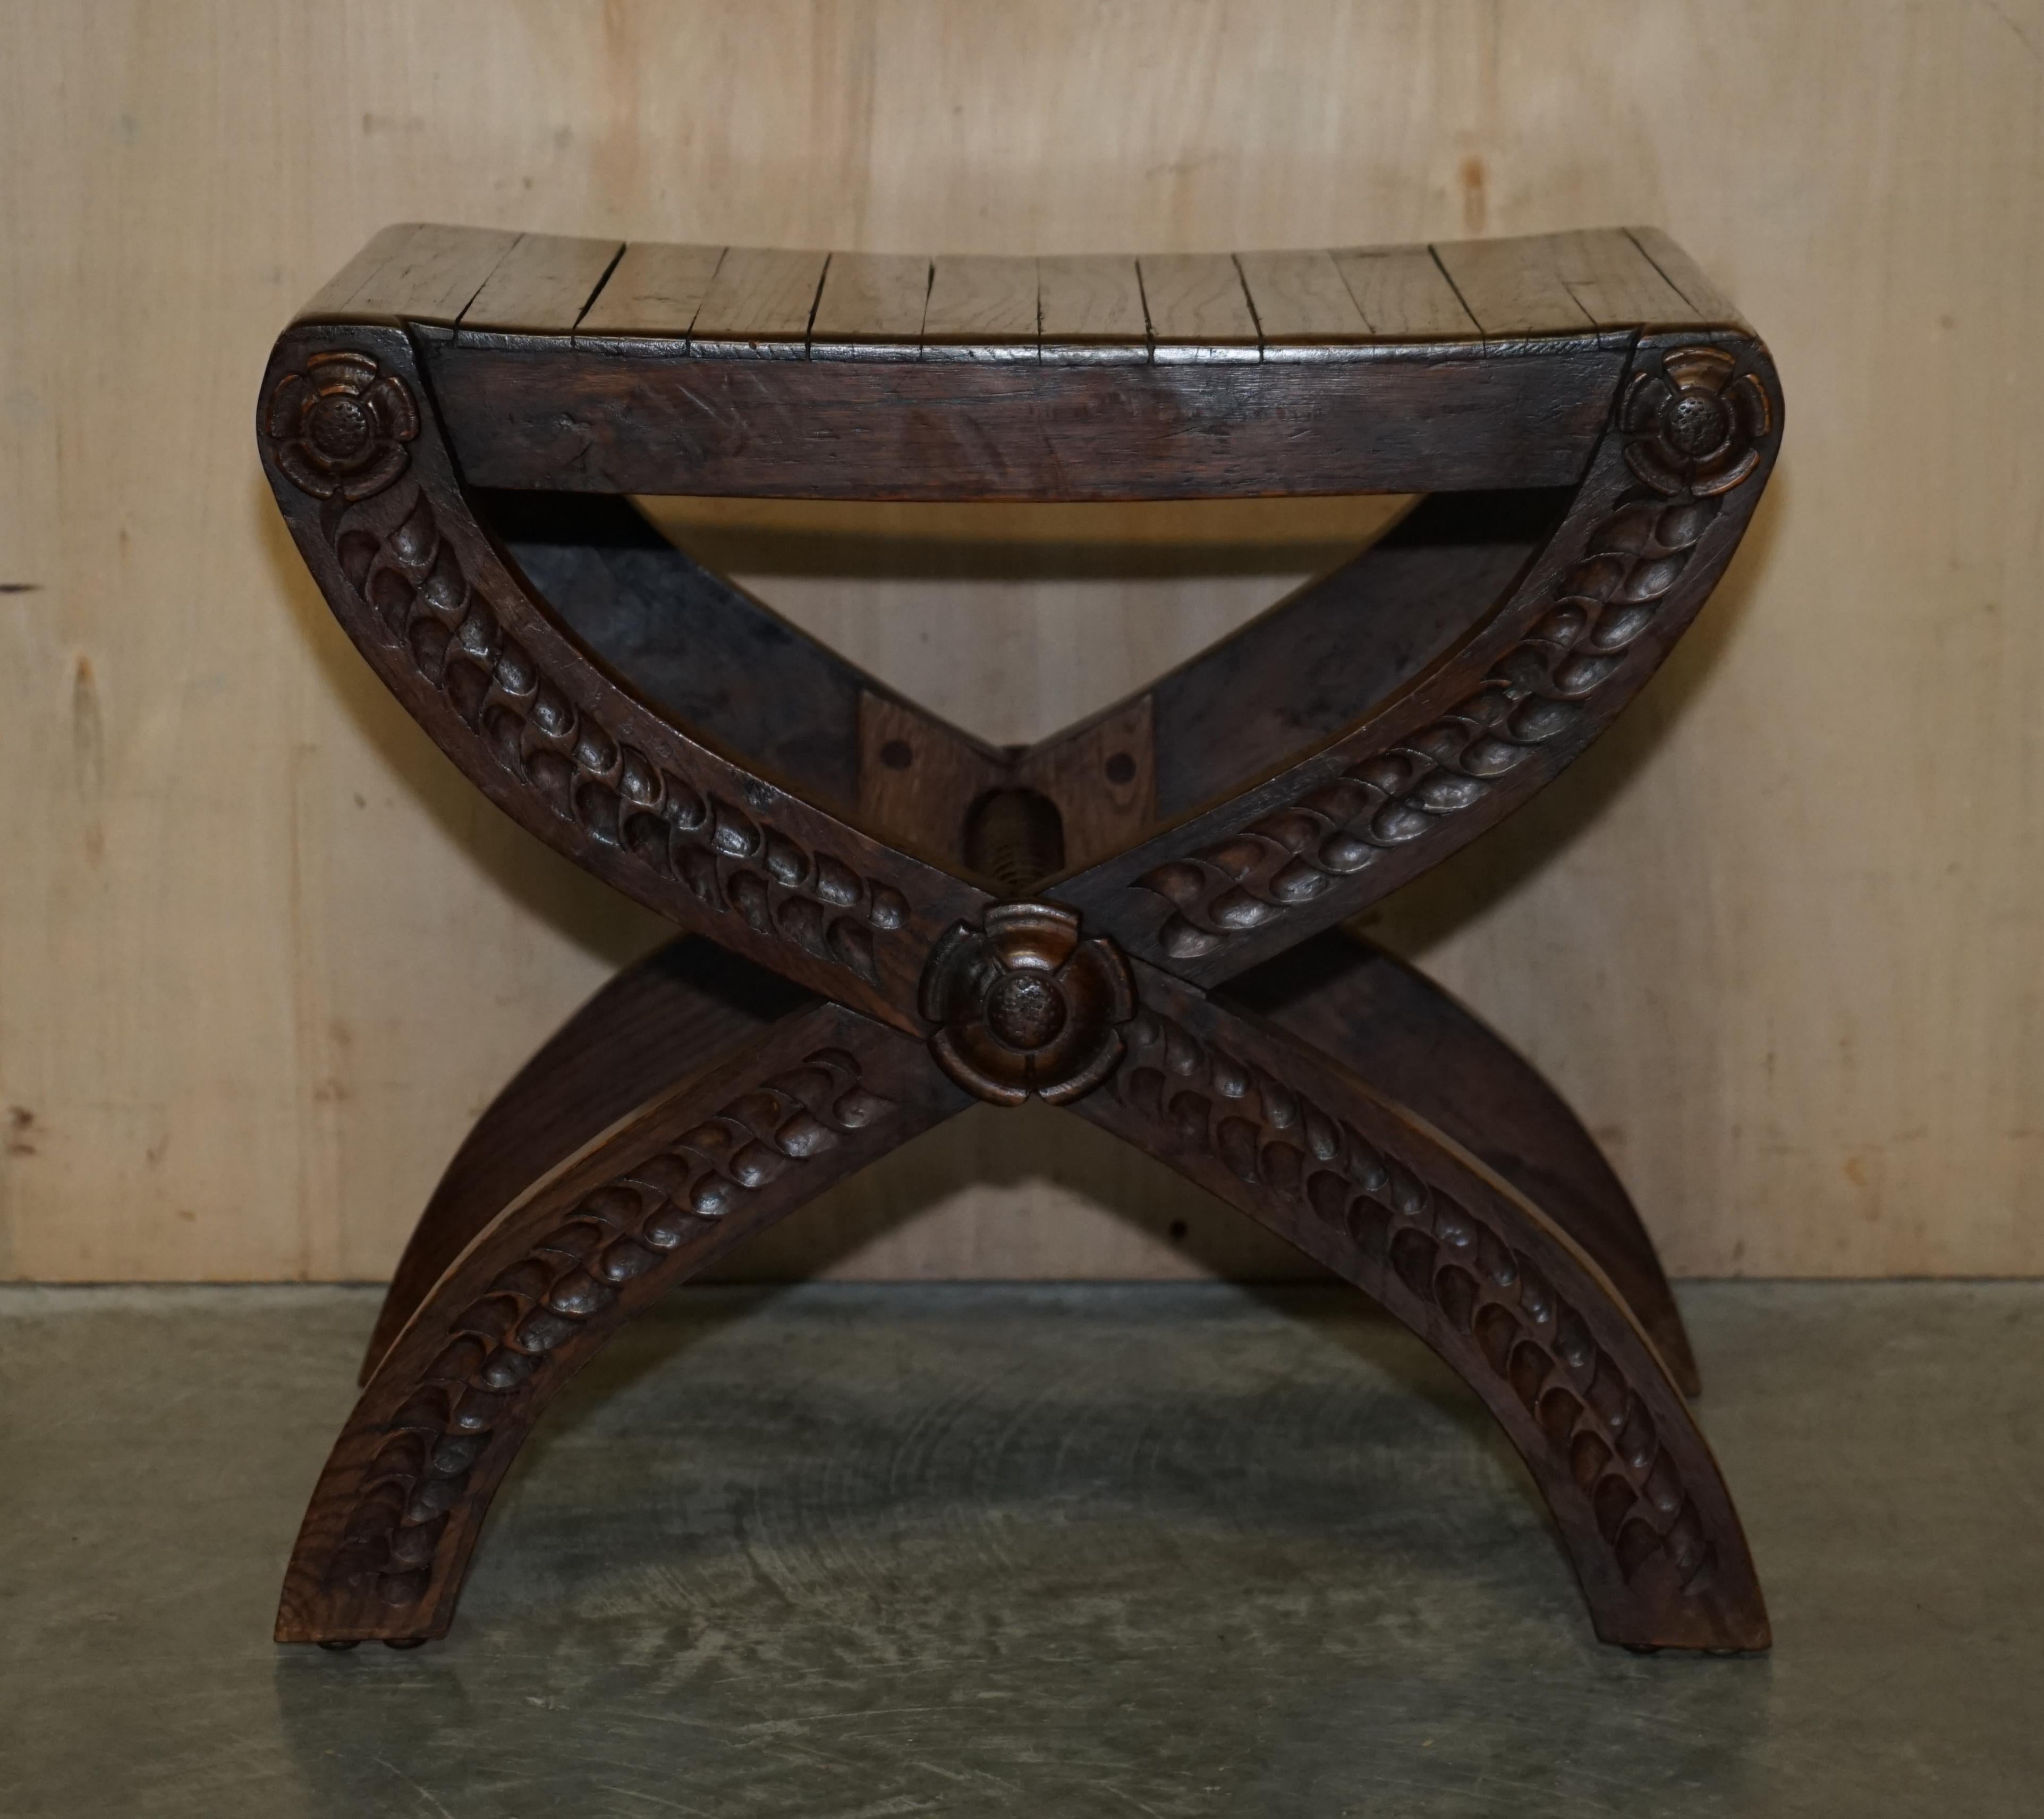 We are delighted to offer for sale this stunning hand carved vintage Jacobean style X framed stool with ornate detailing all over which is part of suite

This piece is part of a set, I have one single stool, a suite of four stools, a matching